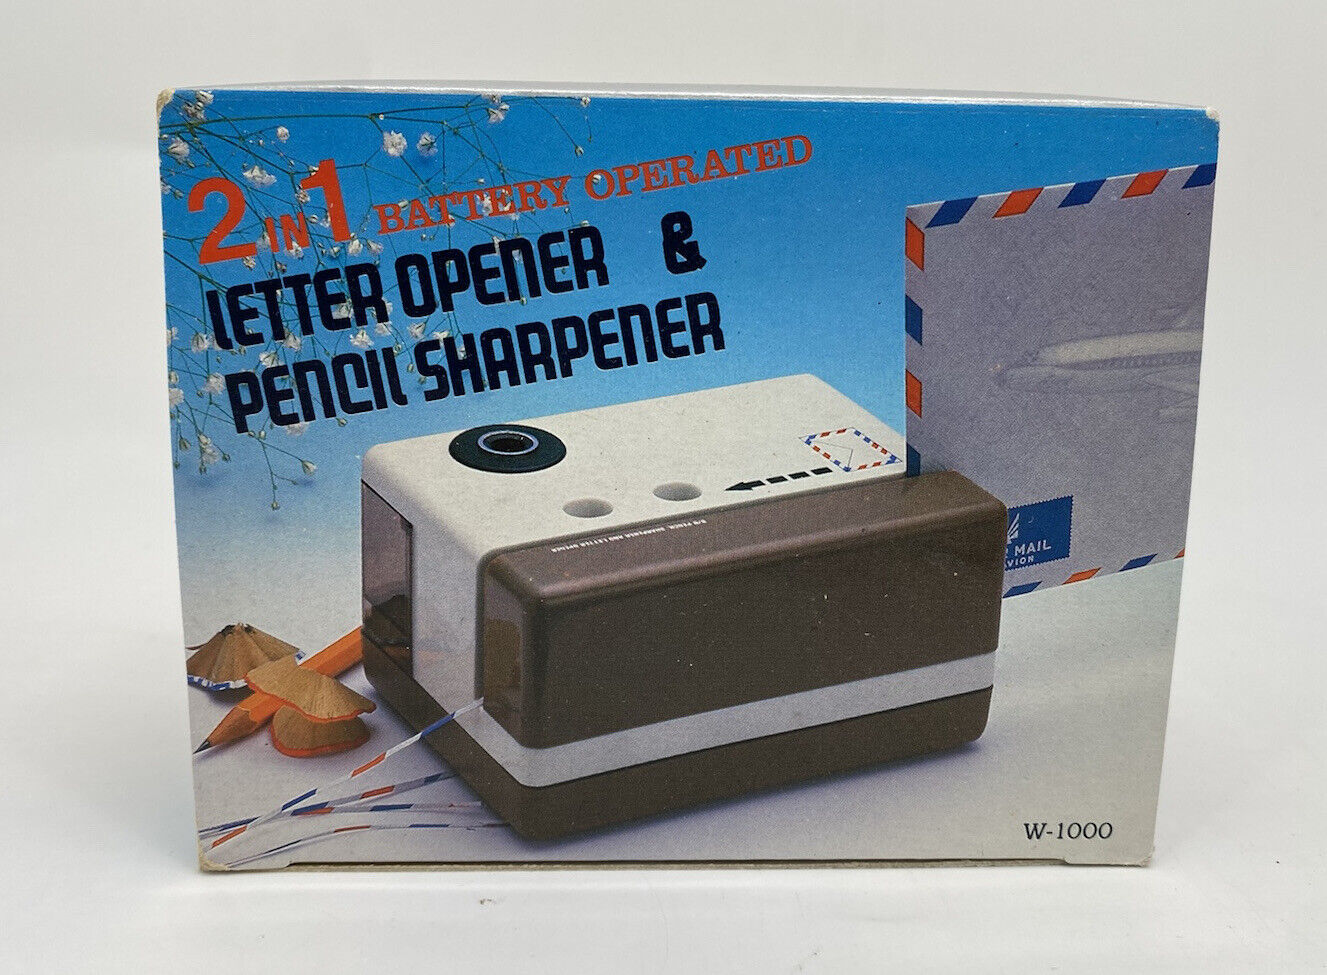 Vintage NOS 2 in 1 Battery Operated Letter Opener Pencil Sharpener NEW